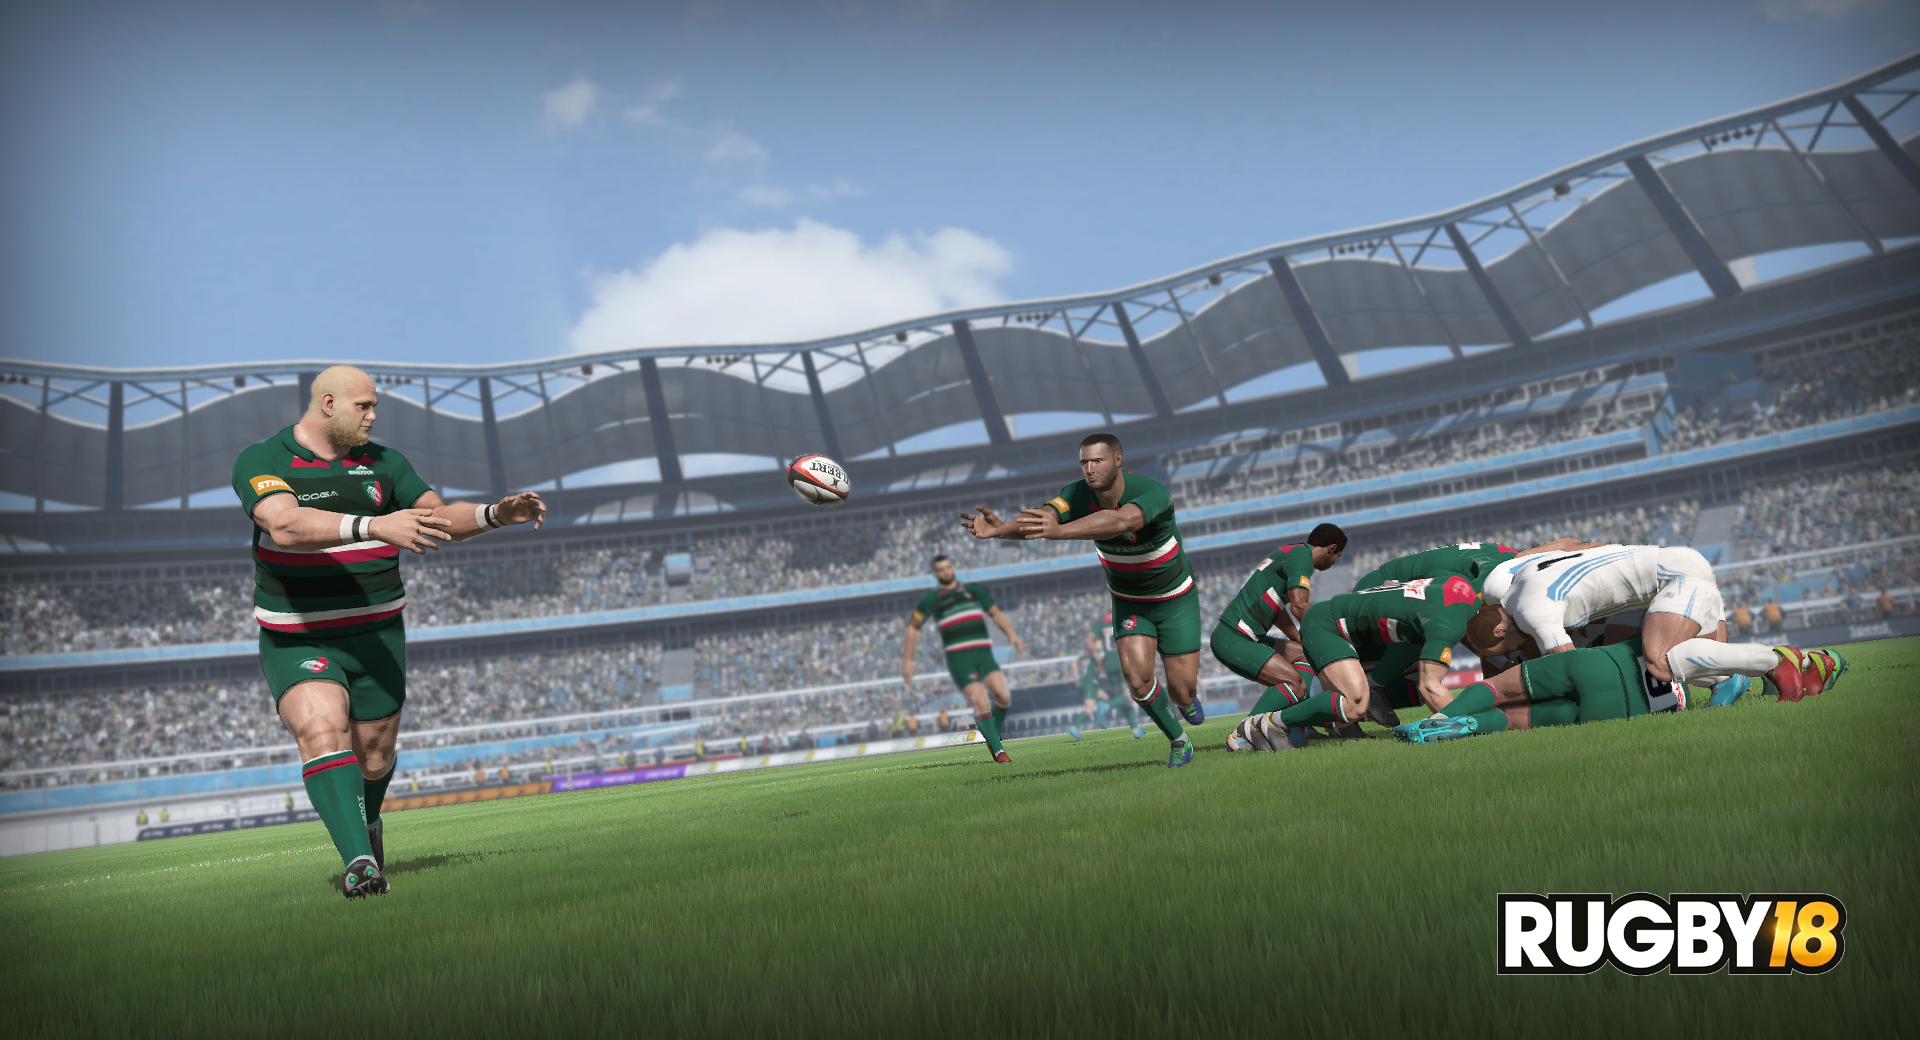 Rugby 18 Review – A Perfect Union